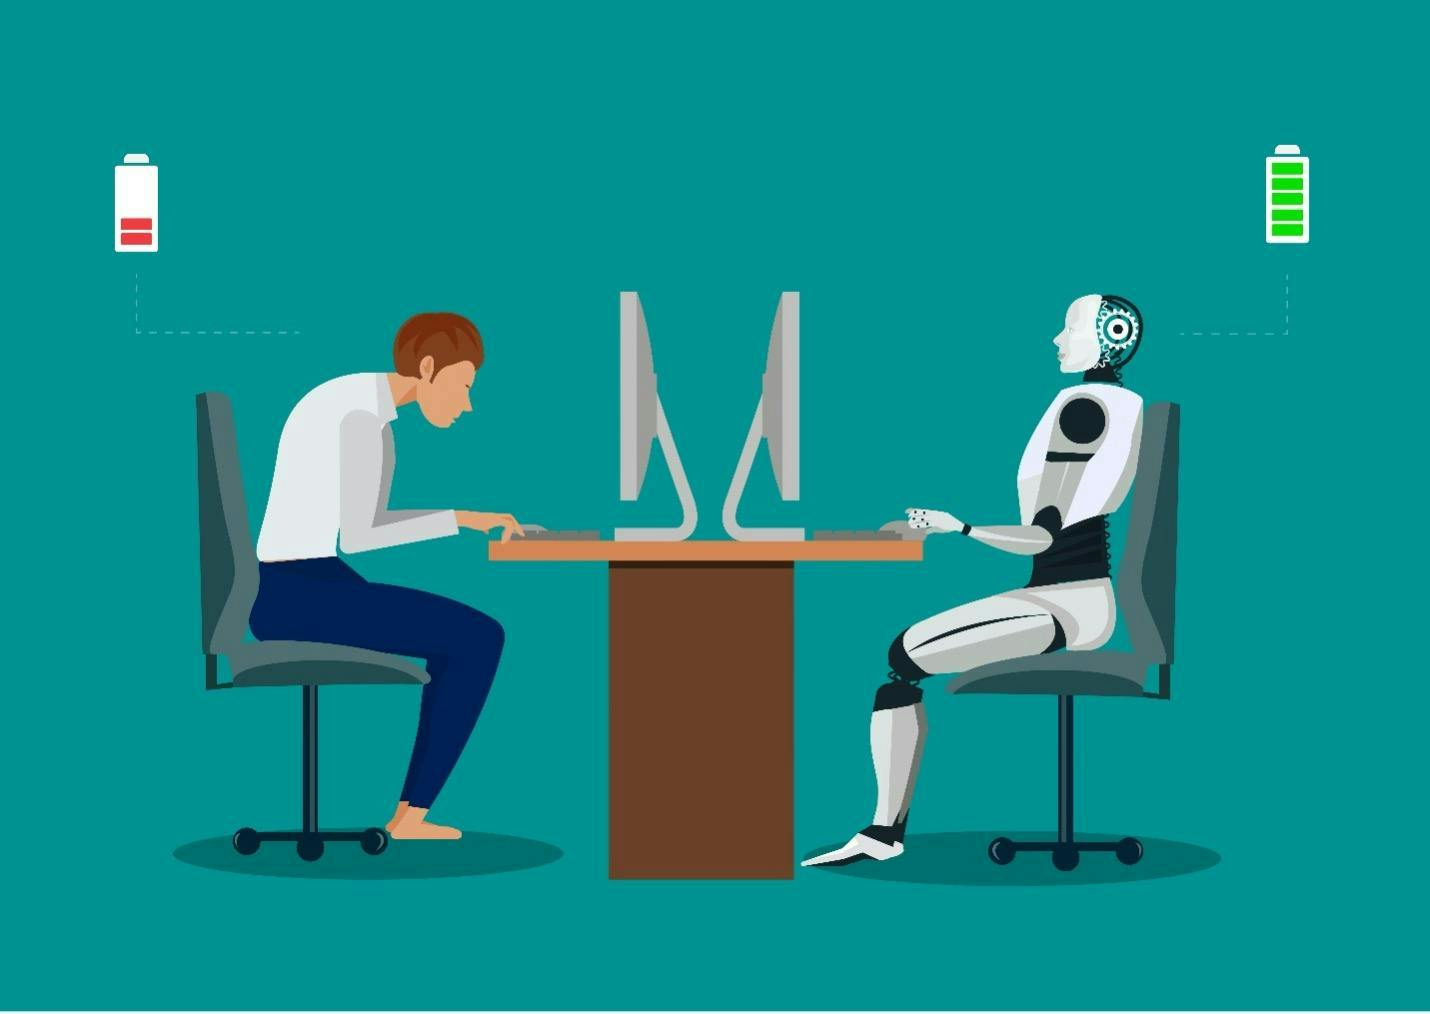 Human and robot working at a desk.